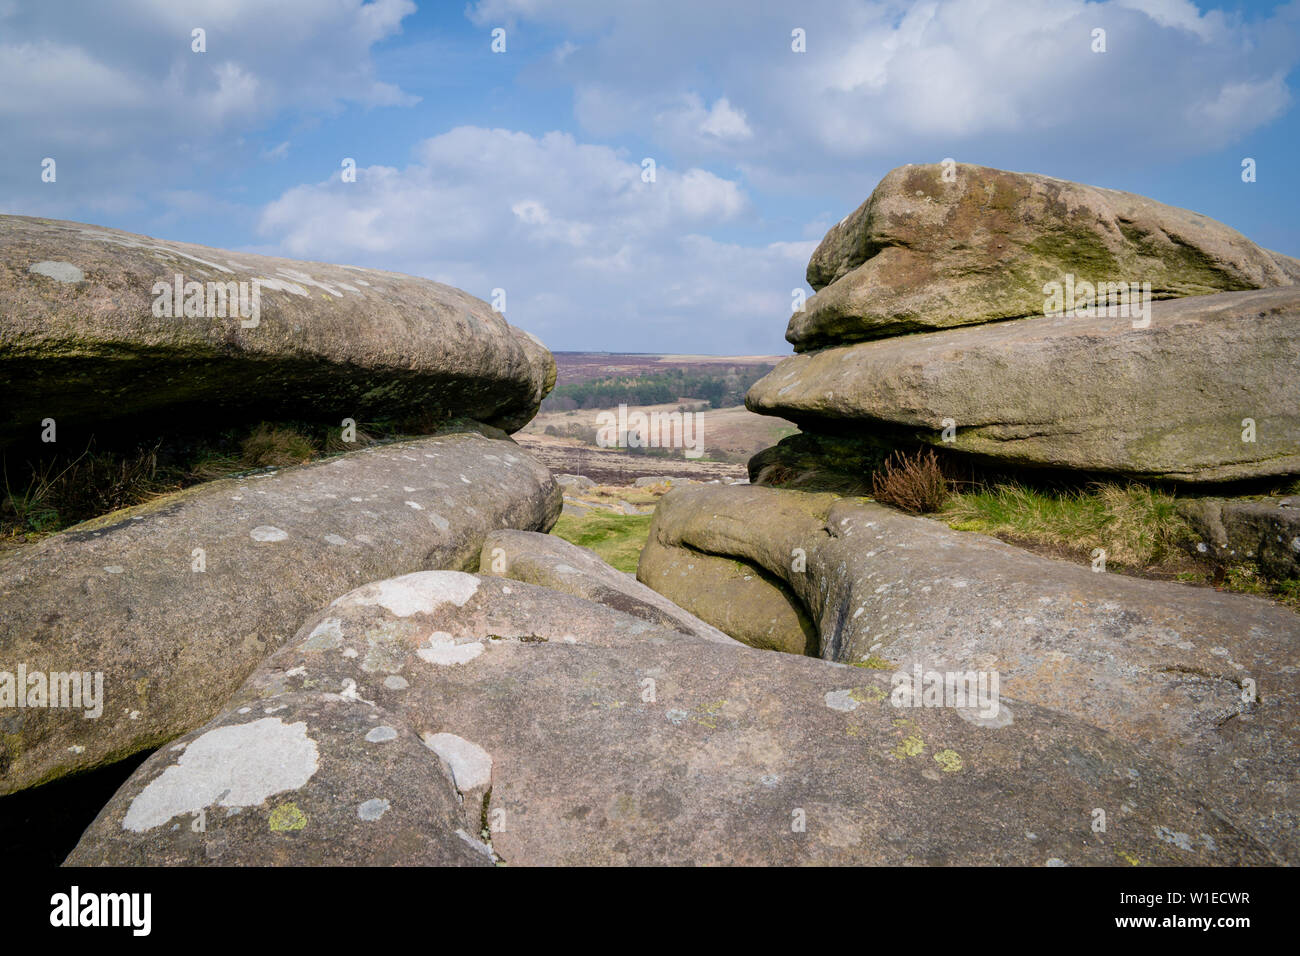 Millstone grit rocks or boulders at Over Owler Tor in the Peak District pointing to a view overlooking moorland Stock Photo